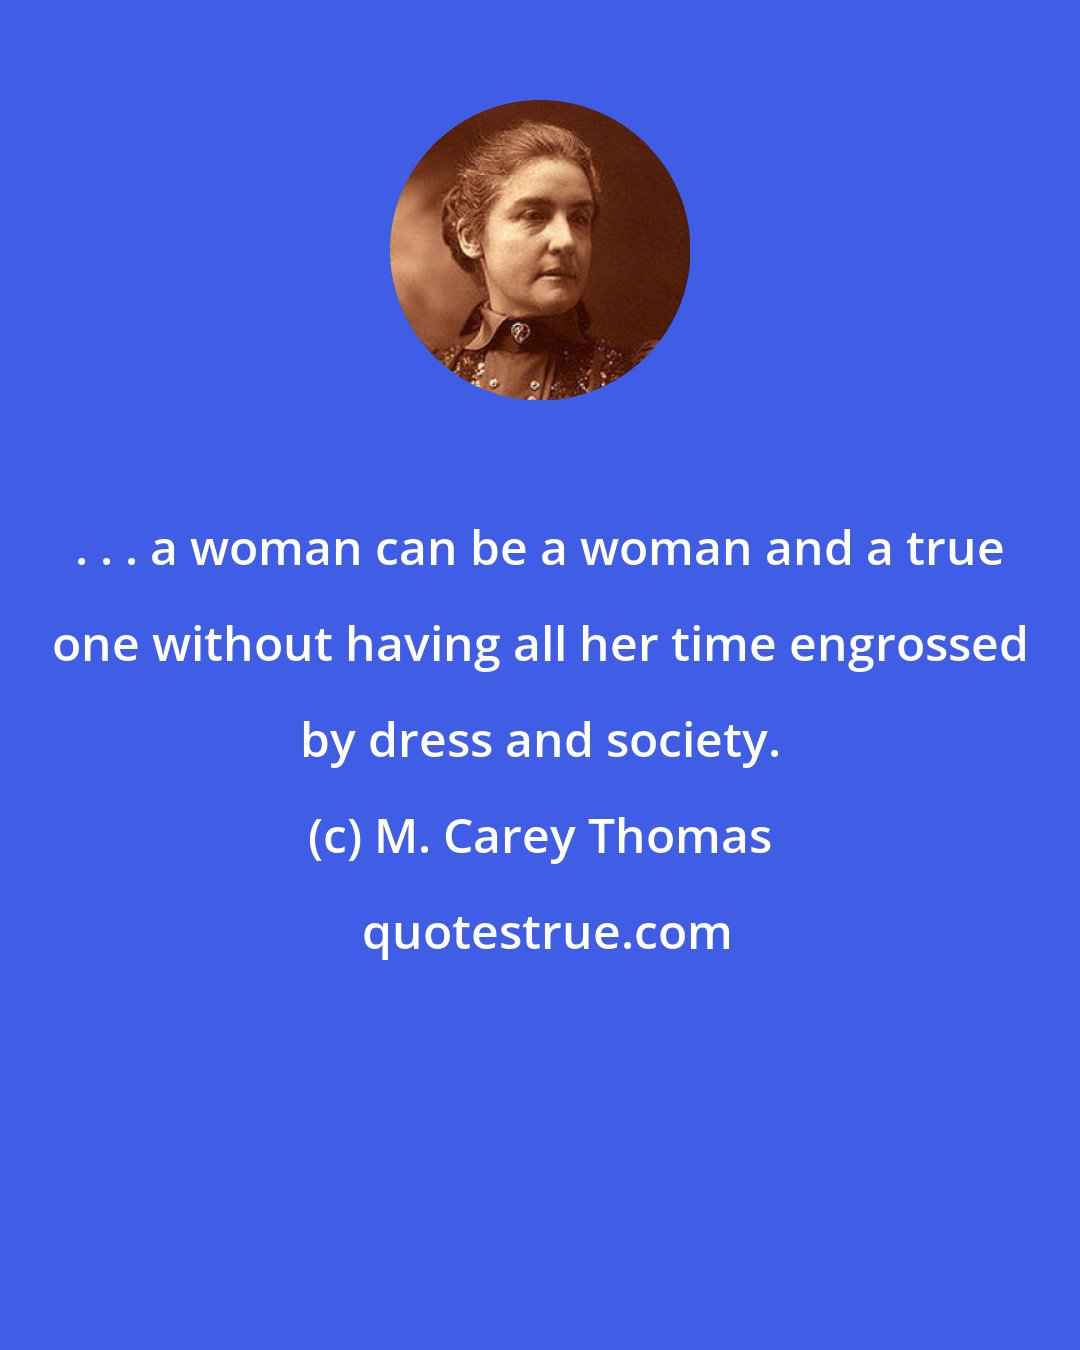 M. Carey Thomas: . . . a woman can be a woman and a true one without having all her time engrossed by dress and society.